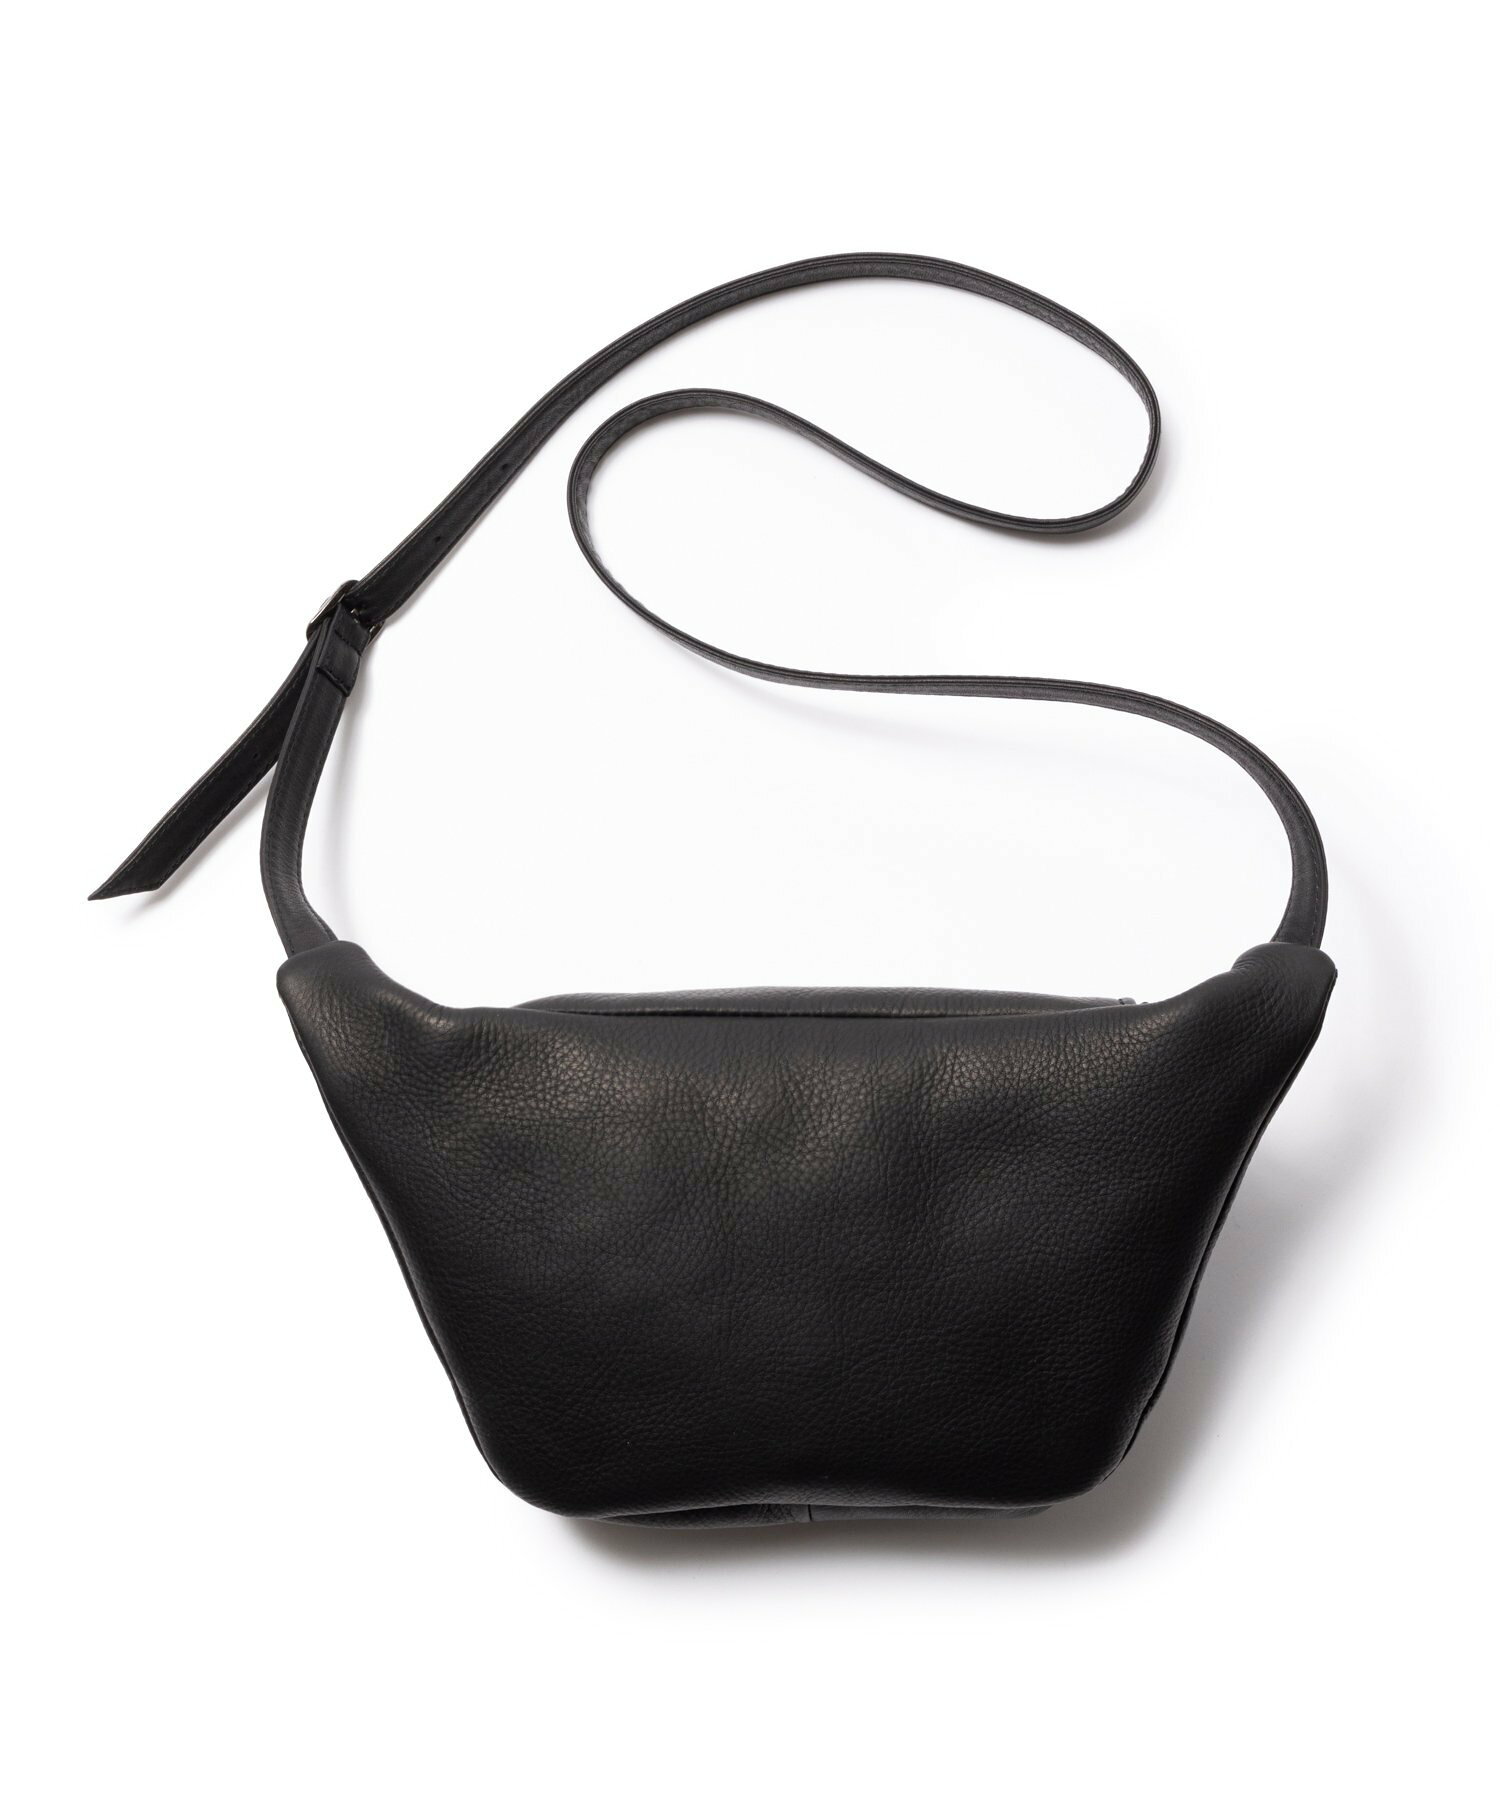 WATER PROOF WASHABLE LEATHER / BODY SHOULDER BAG